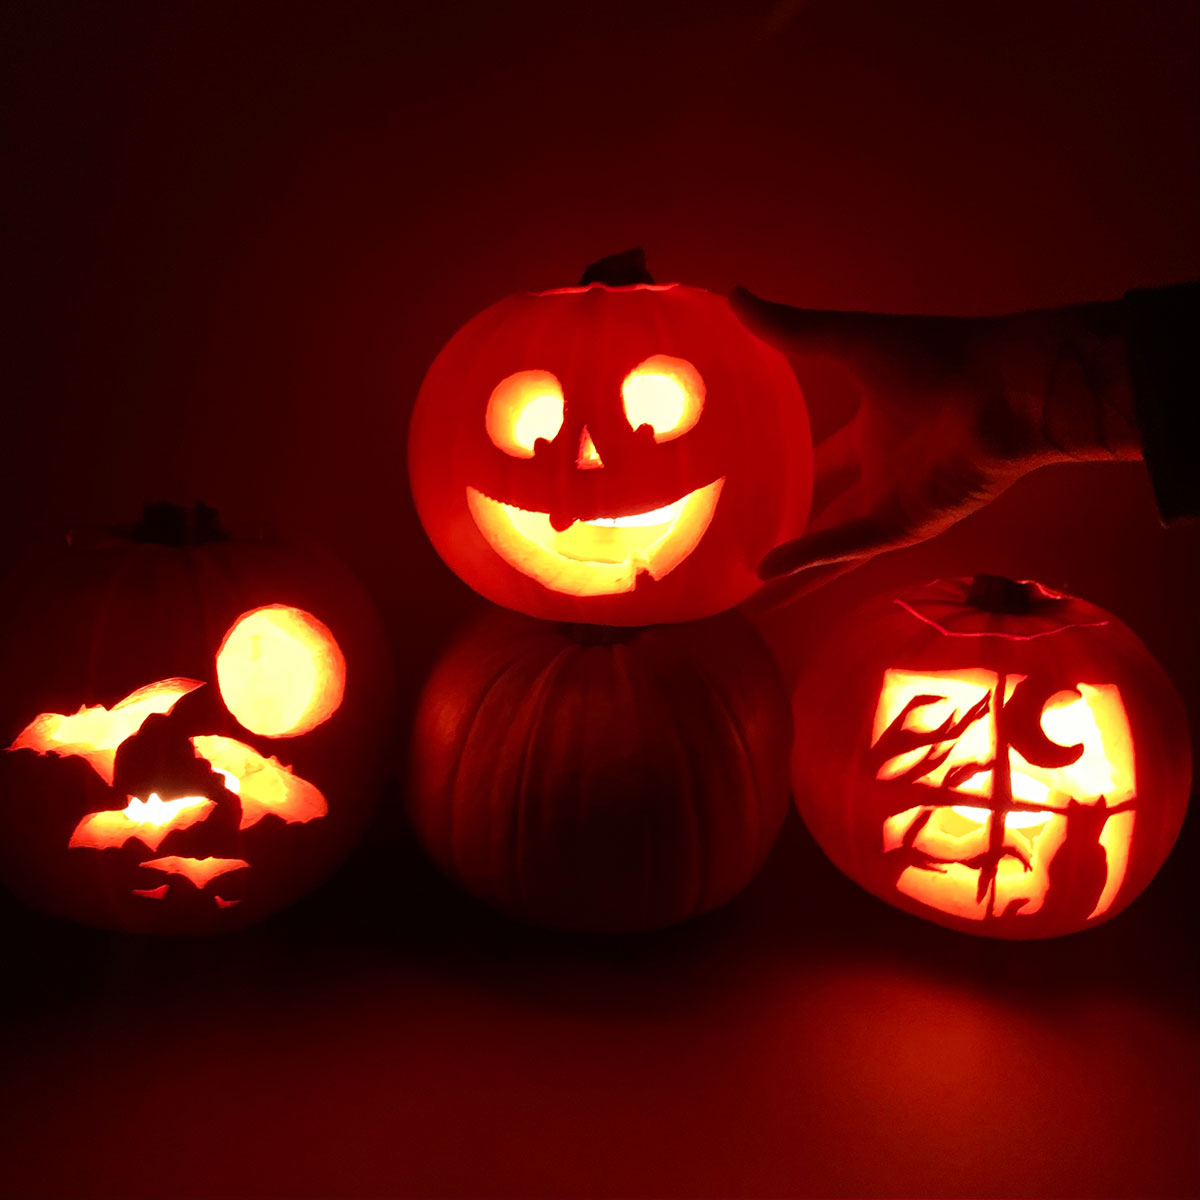 A photo of three carved pumpkins sitting in a darkened room with candles inside them glowing 